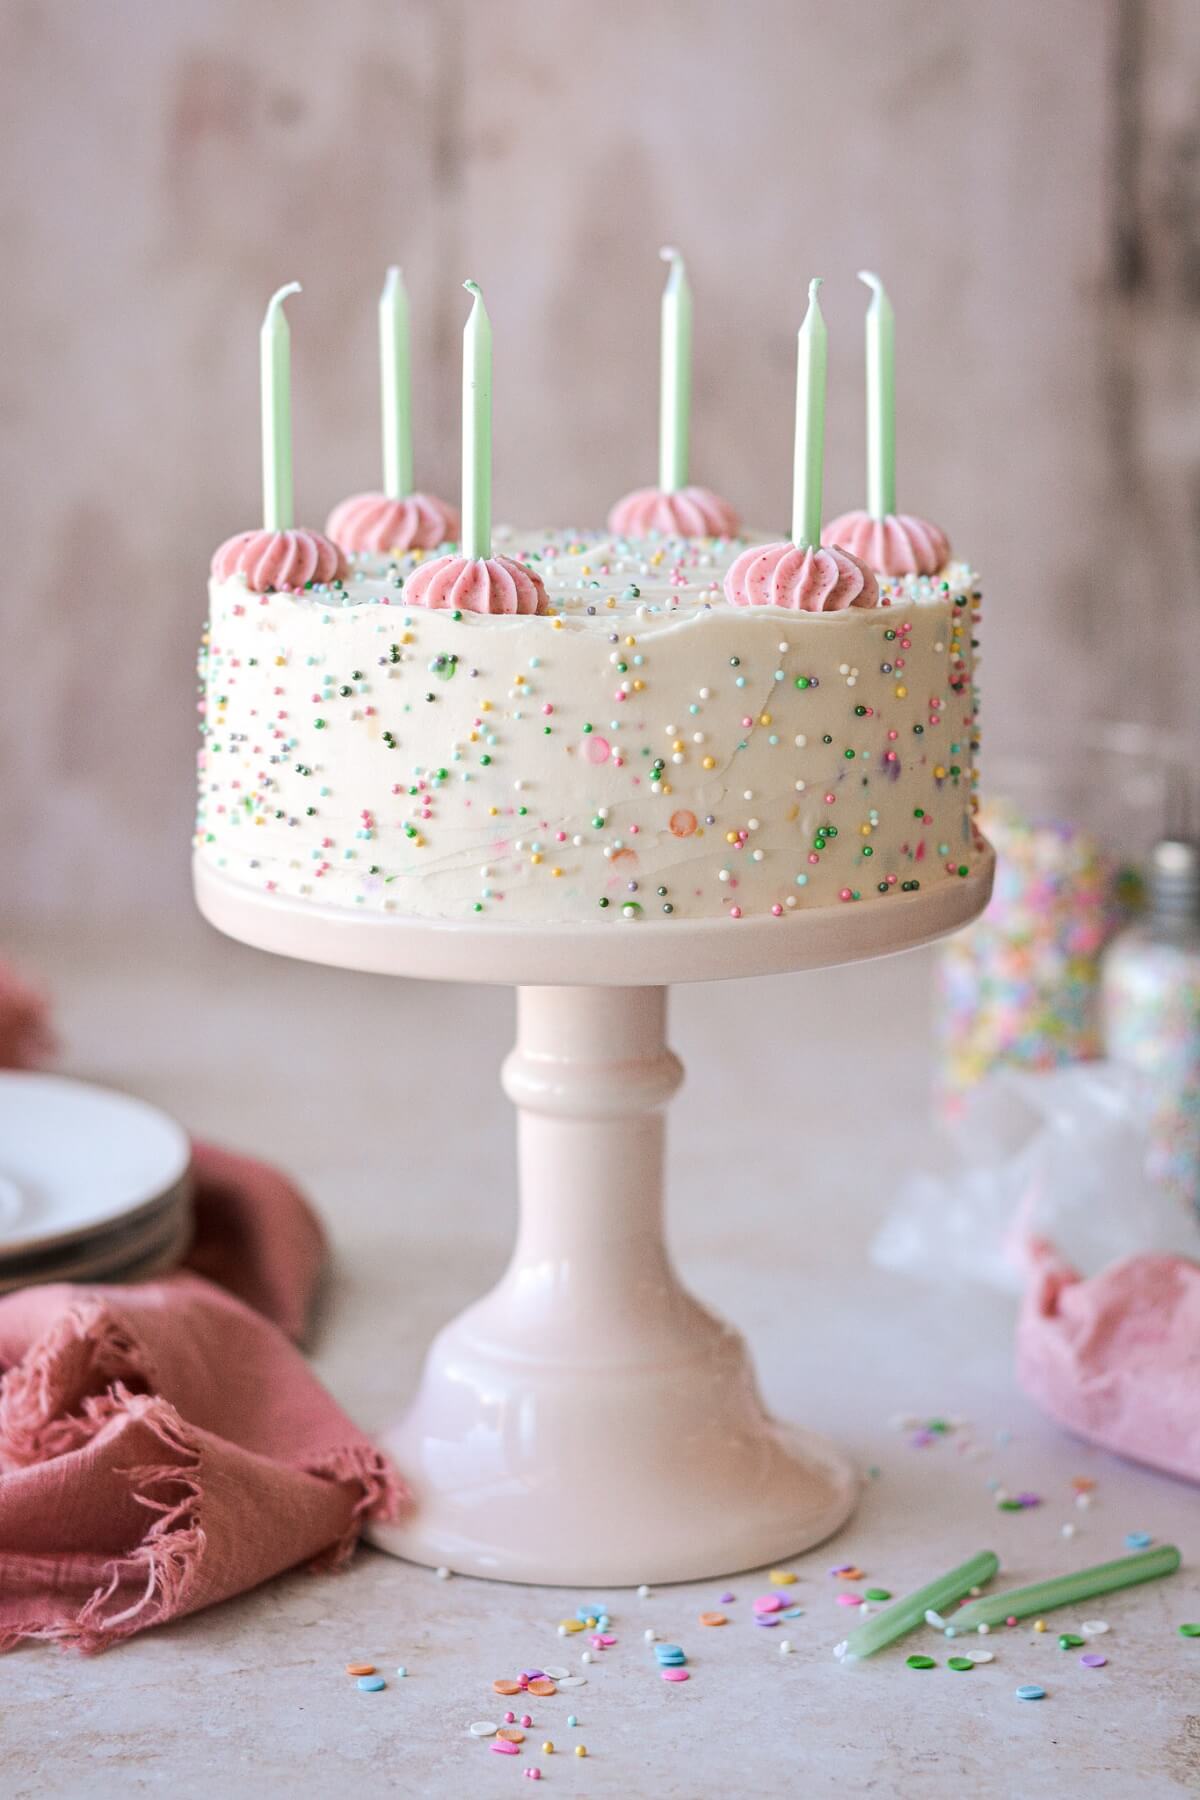 Mini sprinkle cake with green candles and pink piped buttercream.